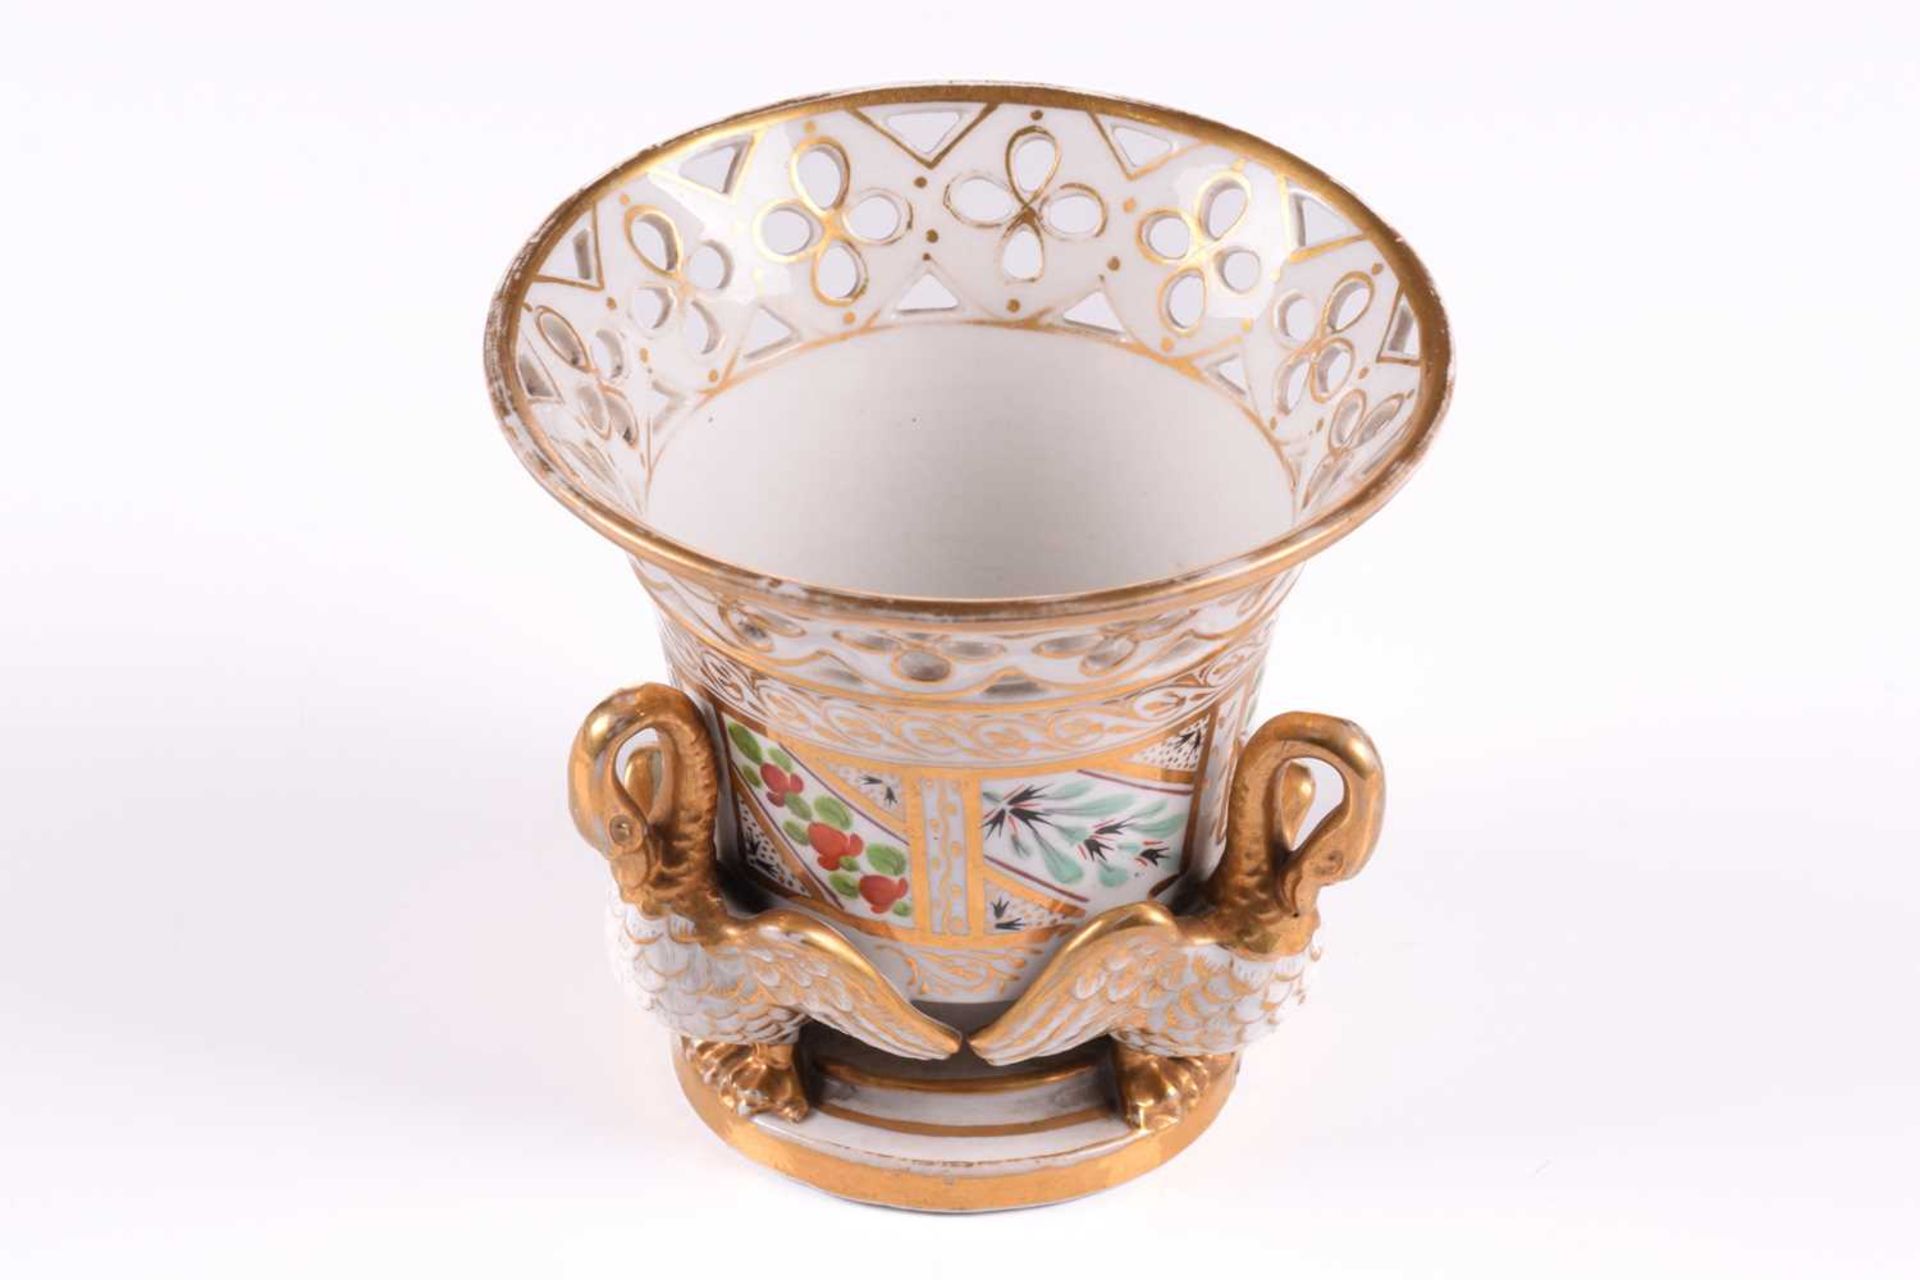 A Vienna bisque porcelain swan sauce boat early 20th century, with a gilded interior, based on an - Bild 5 aus 21